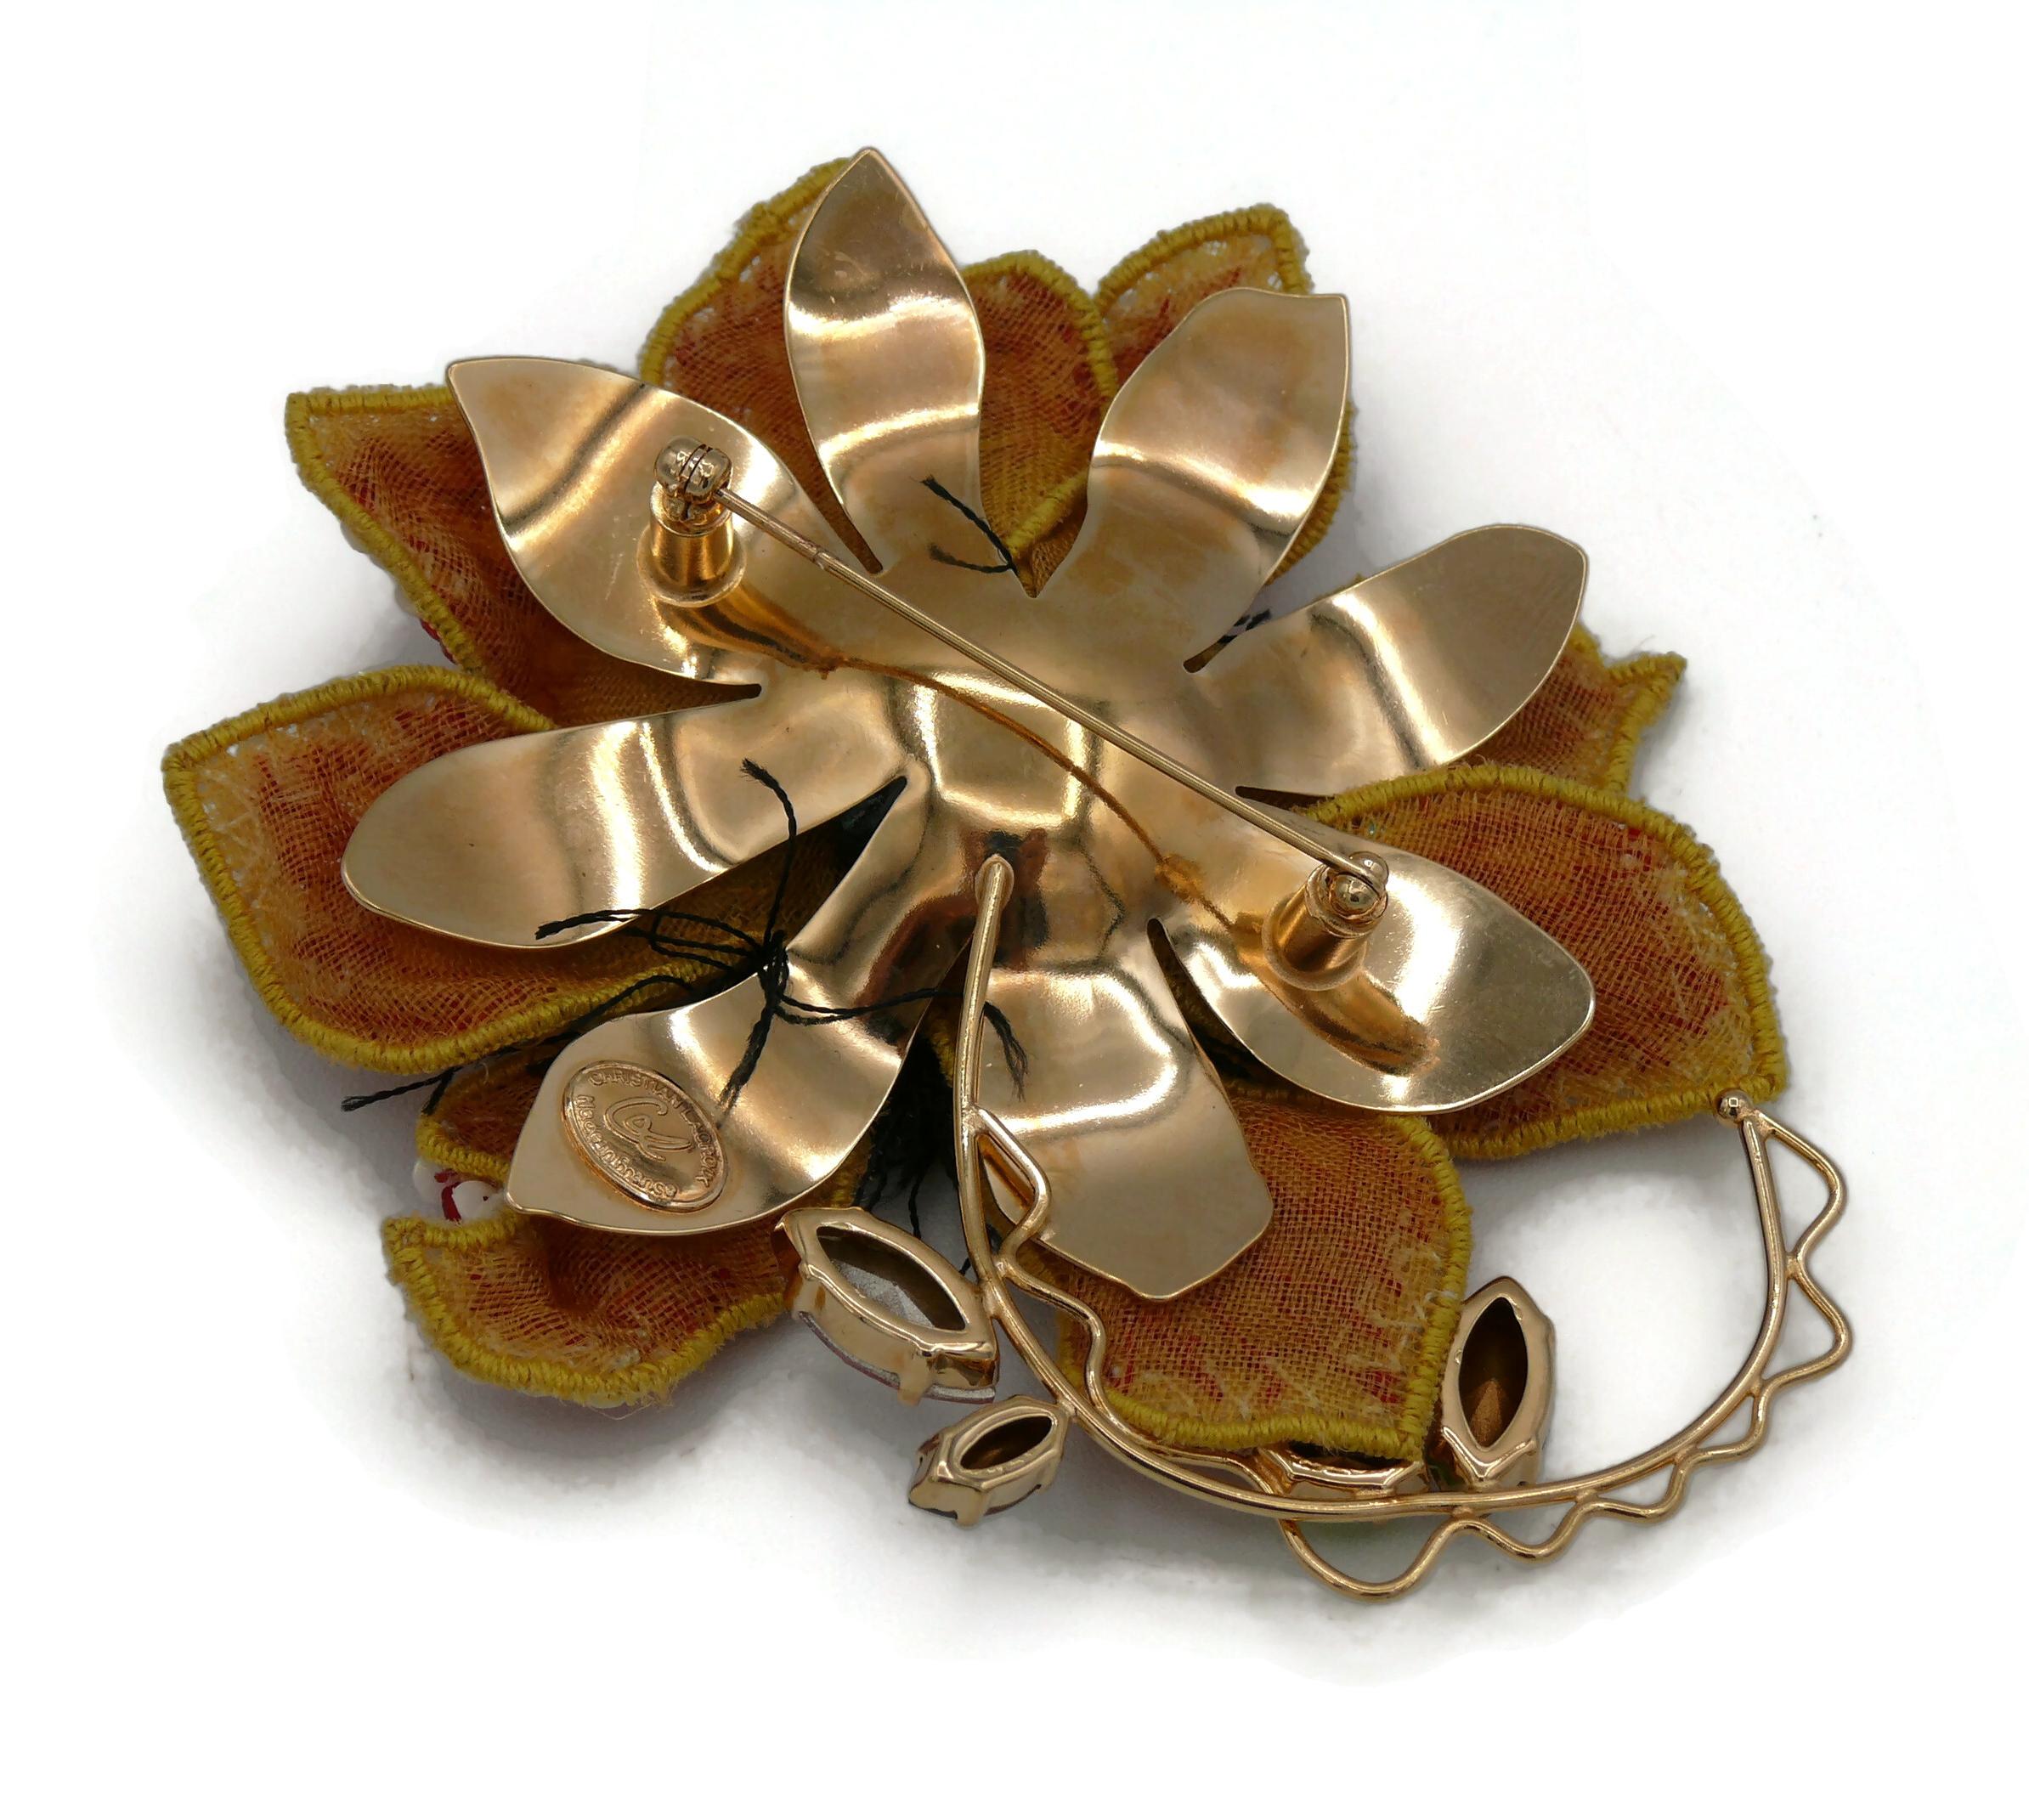 CHRISTIAN LACROIX Vintage Embroidered Flower Brooch For Sale 4